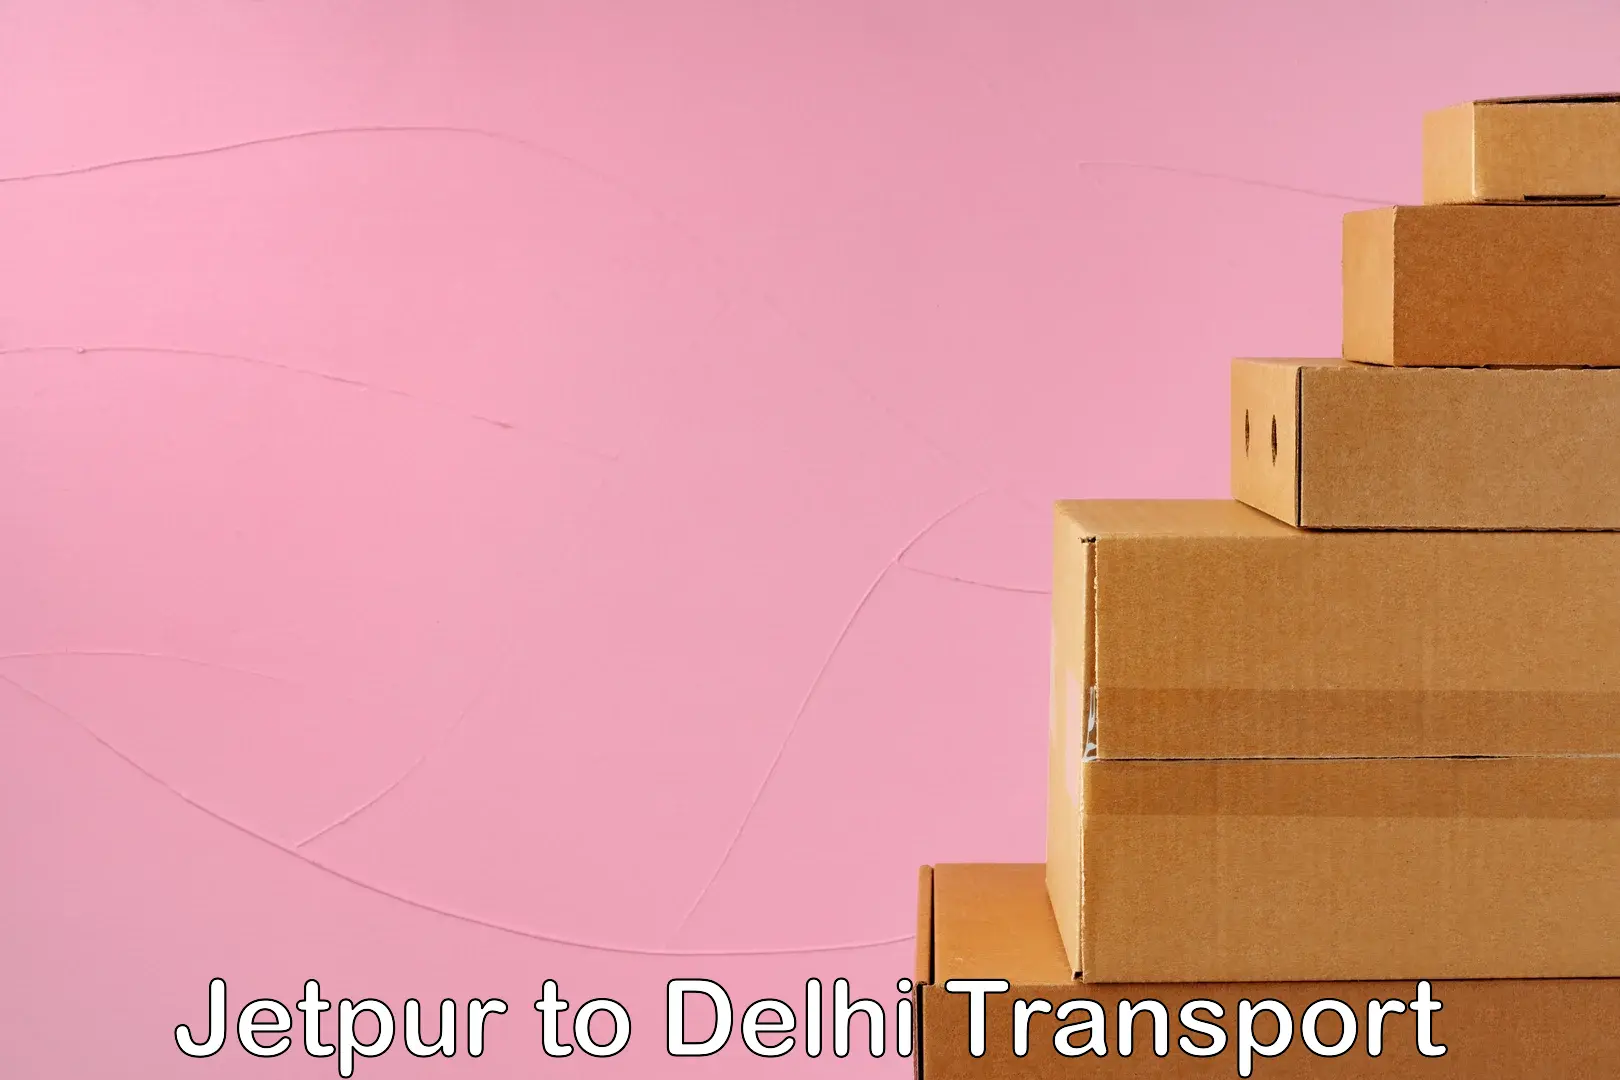 Container transport service Jetpur to NIT Delhi